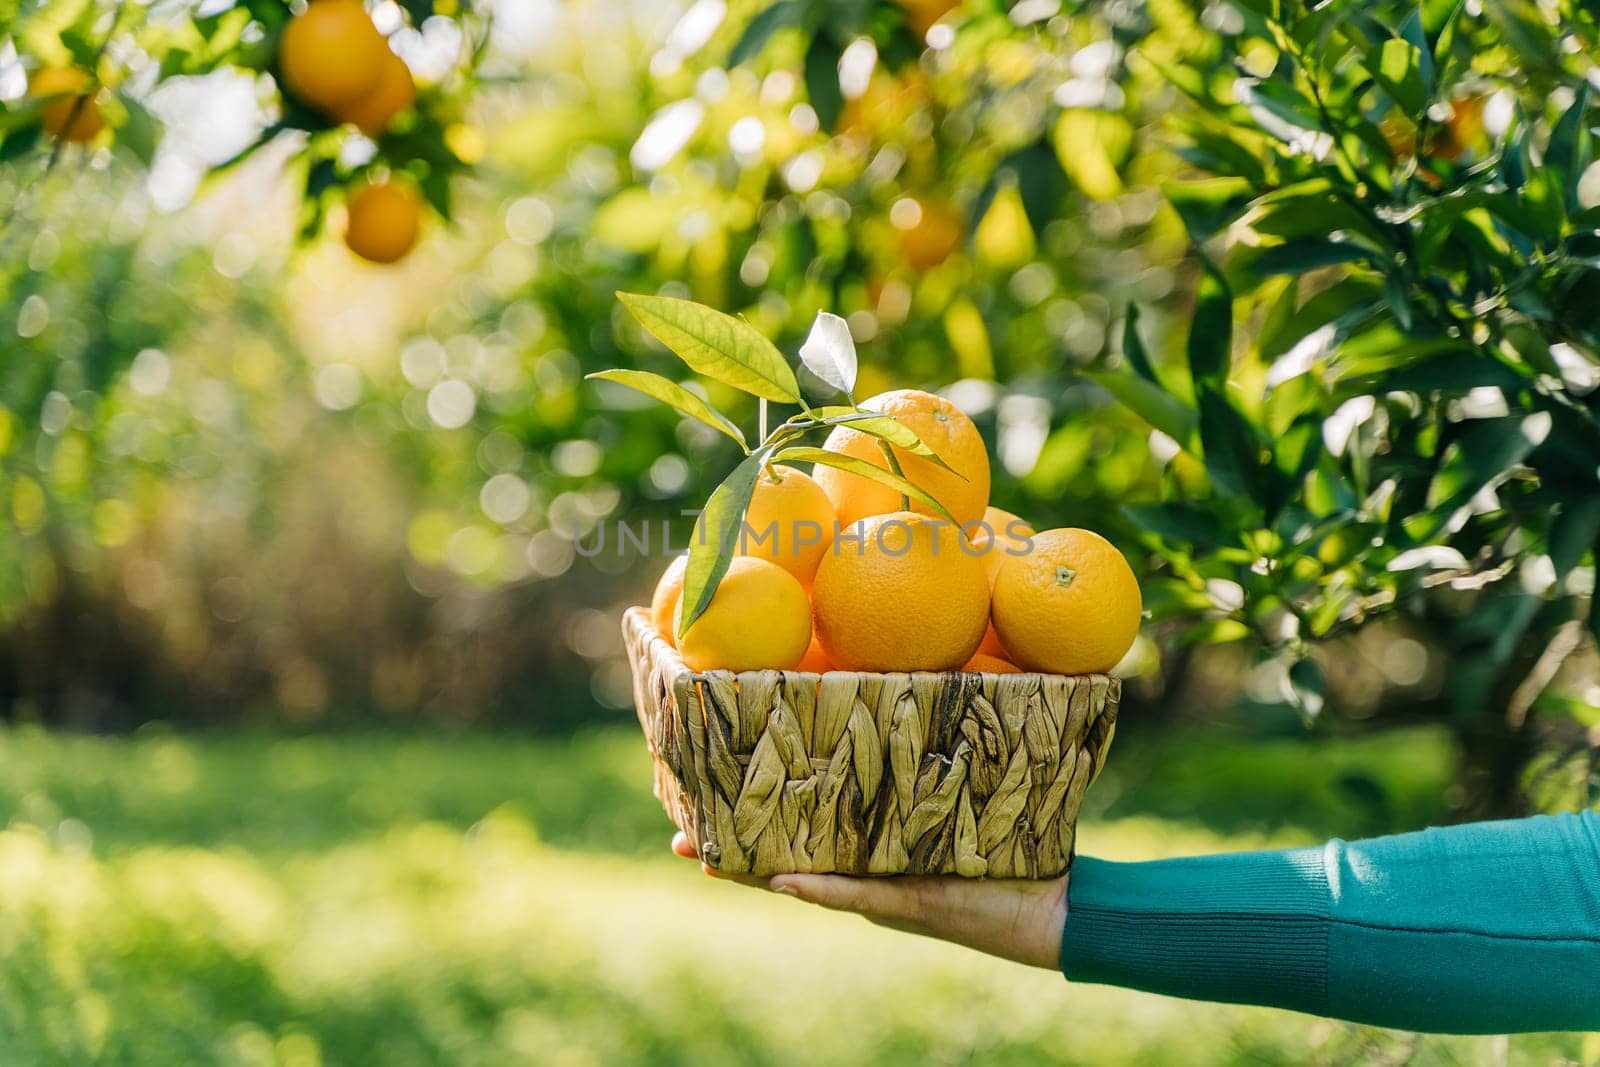 Close-up of woman hands holding wicker basket full of oranges ripe fresh organic vegetables. Summer harvest in orange garden. Background with green oranges tree.